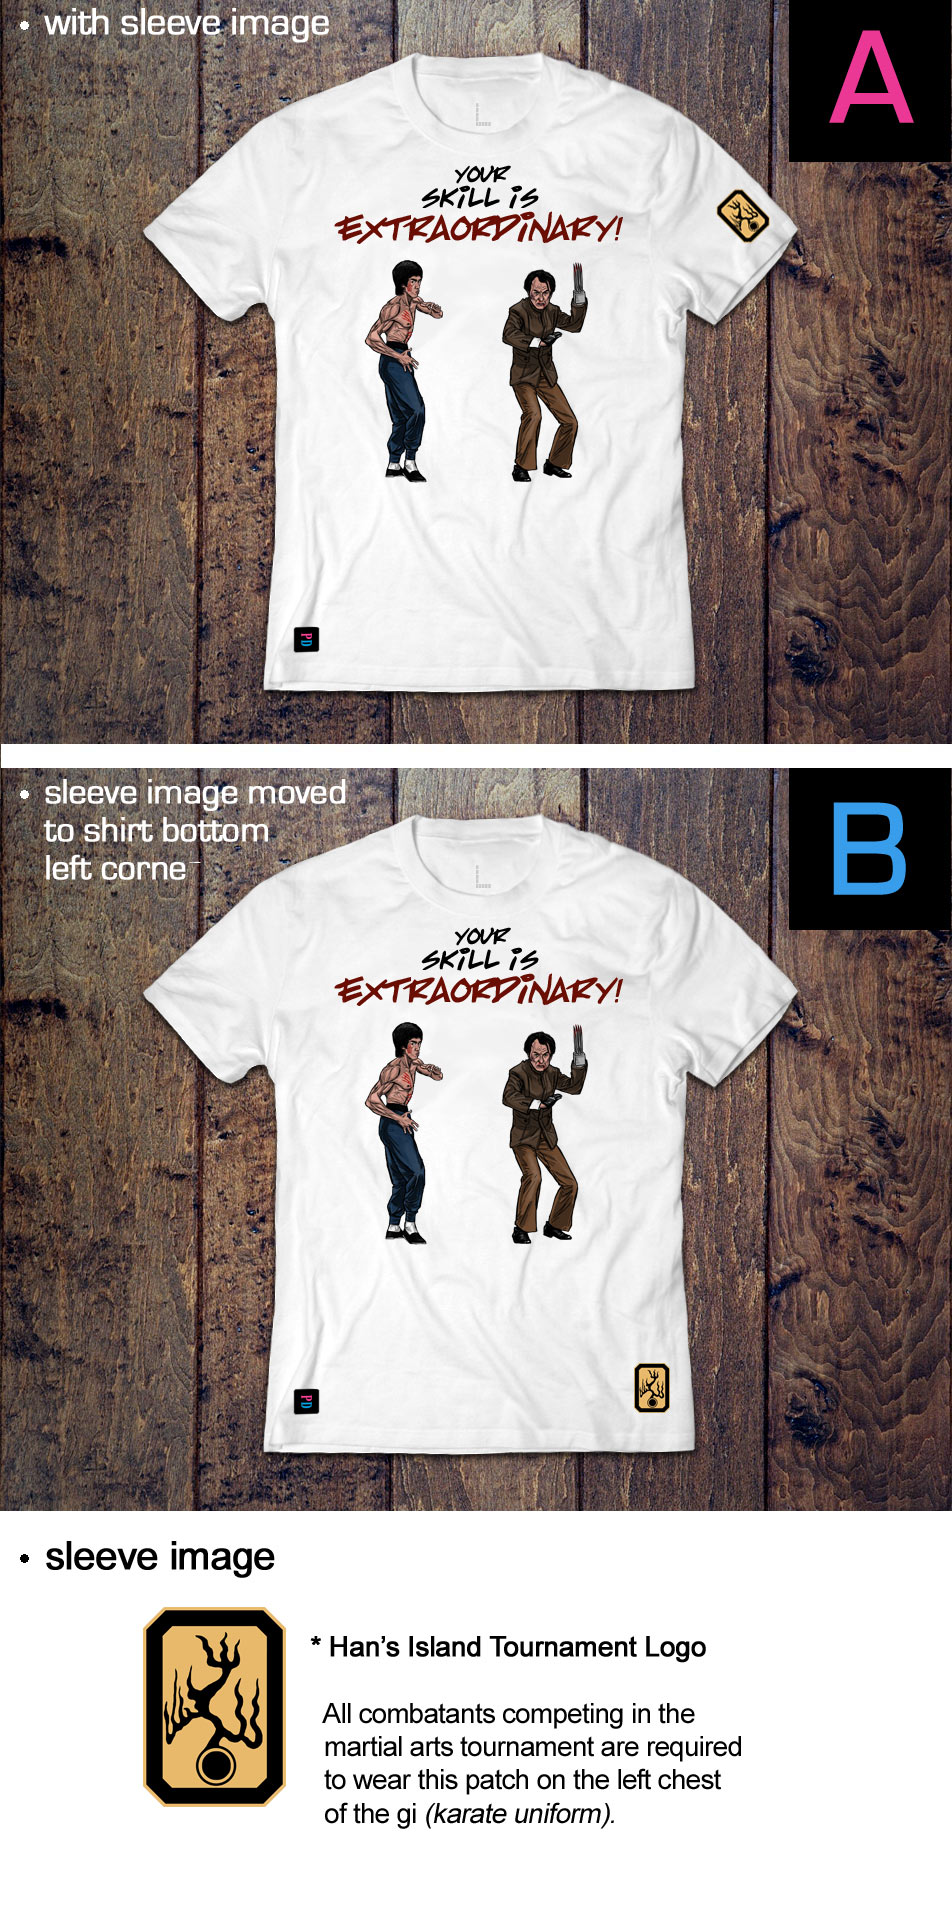 Your Skill Is Extraordinary! T-Shirt design by Marten Go aka MGO